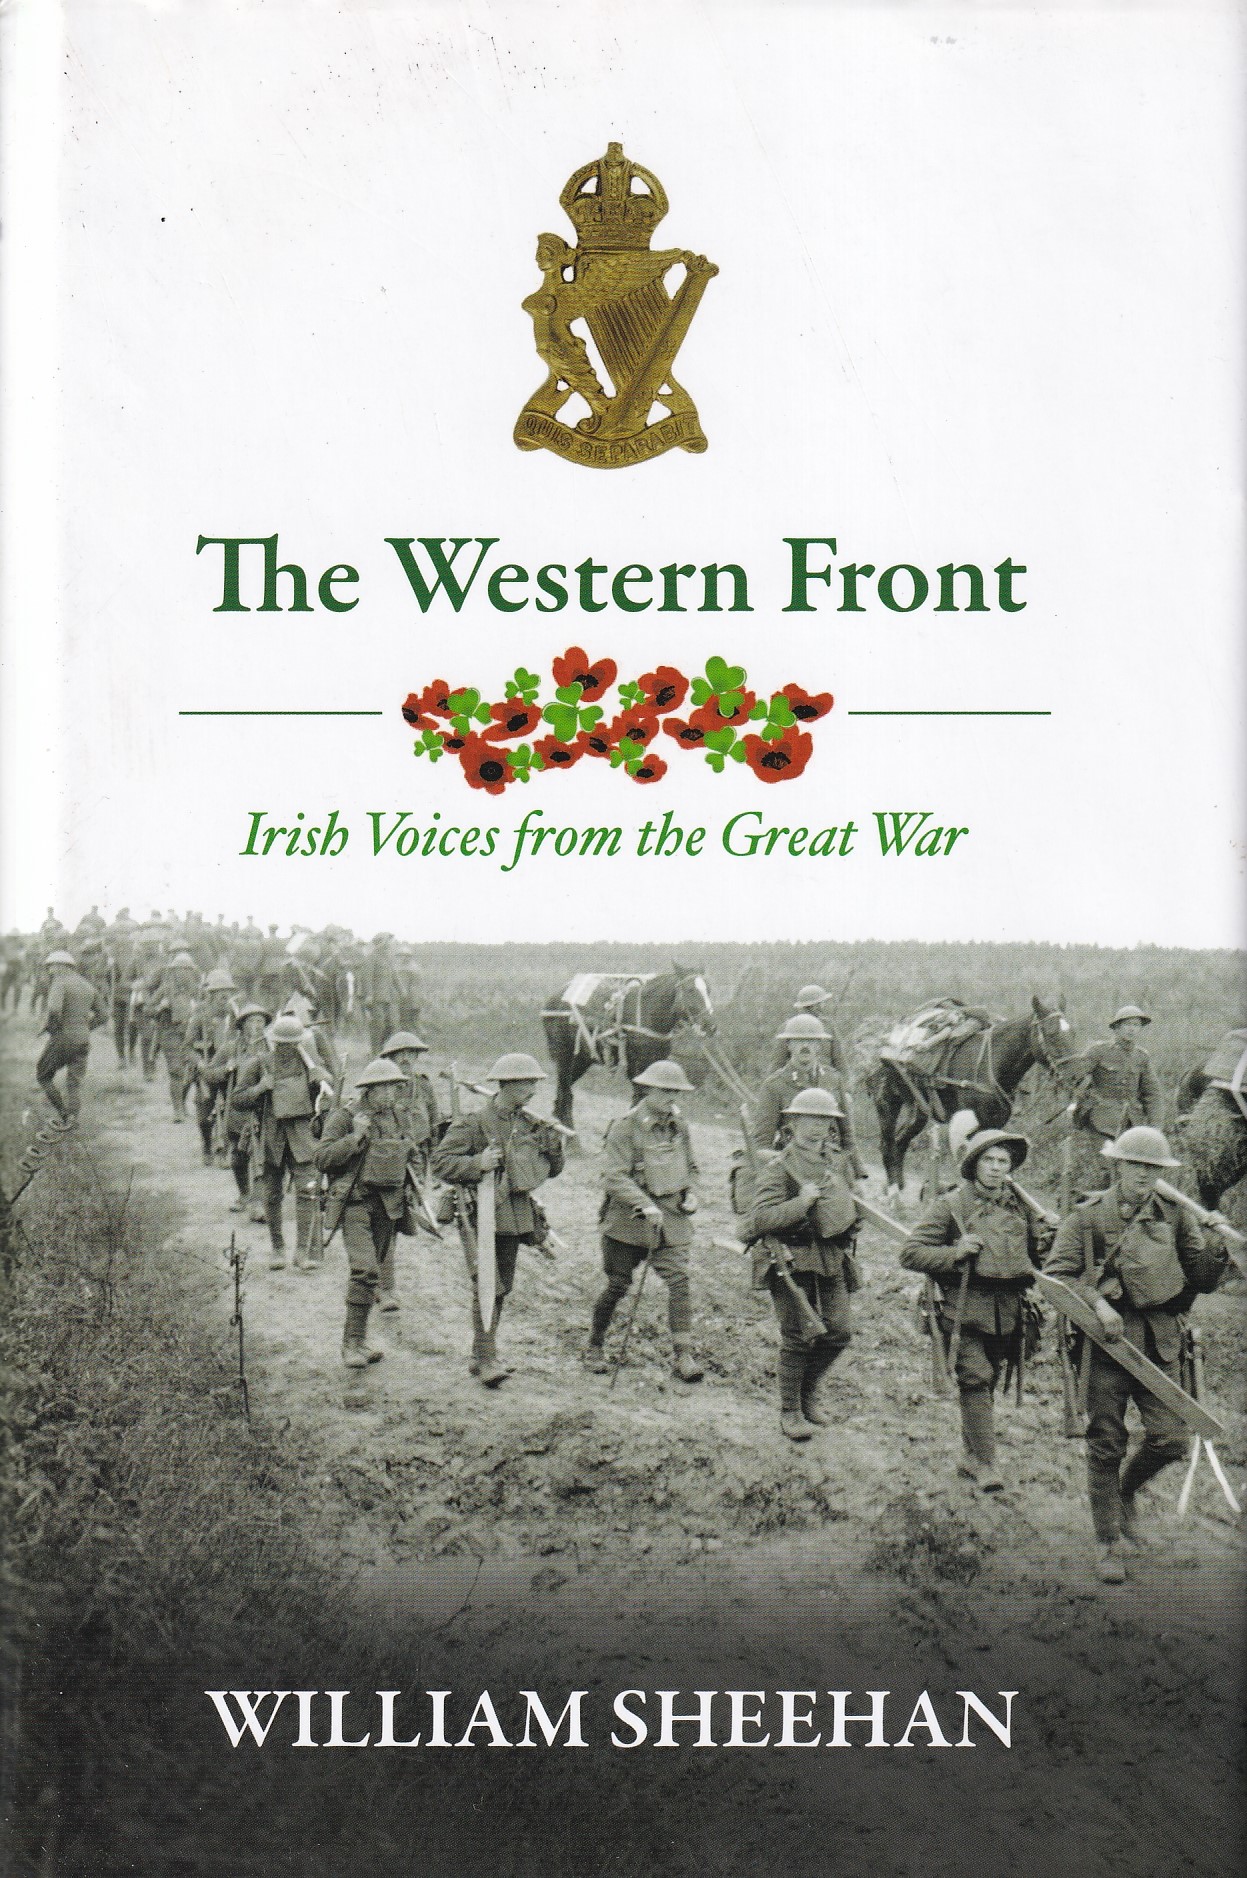 The Western Front: Irish Voices from the Great War by William Sheehan